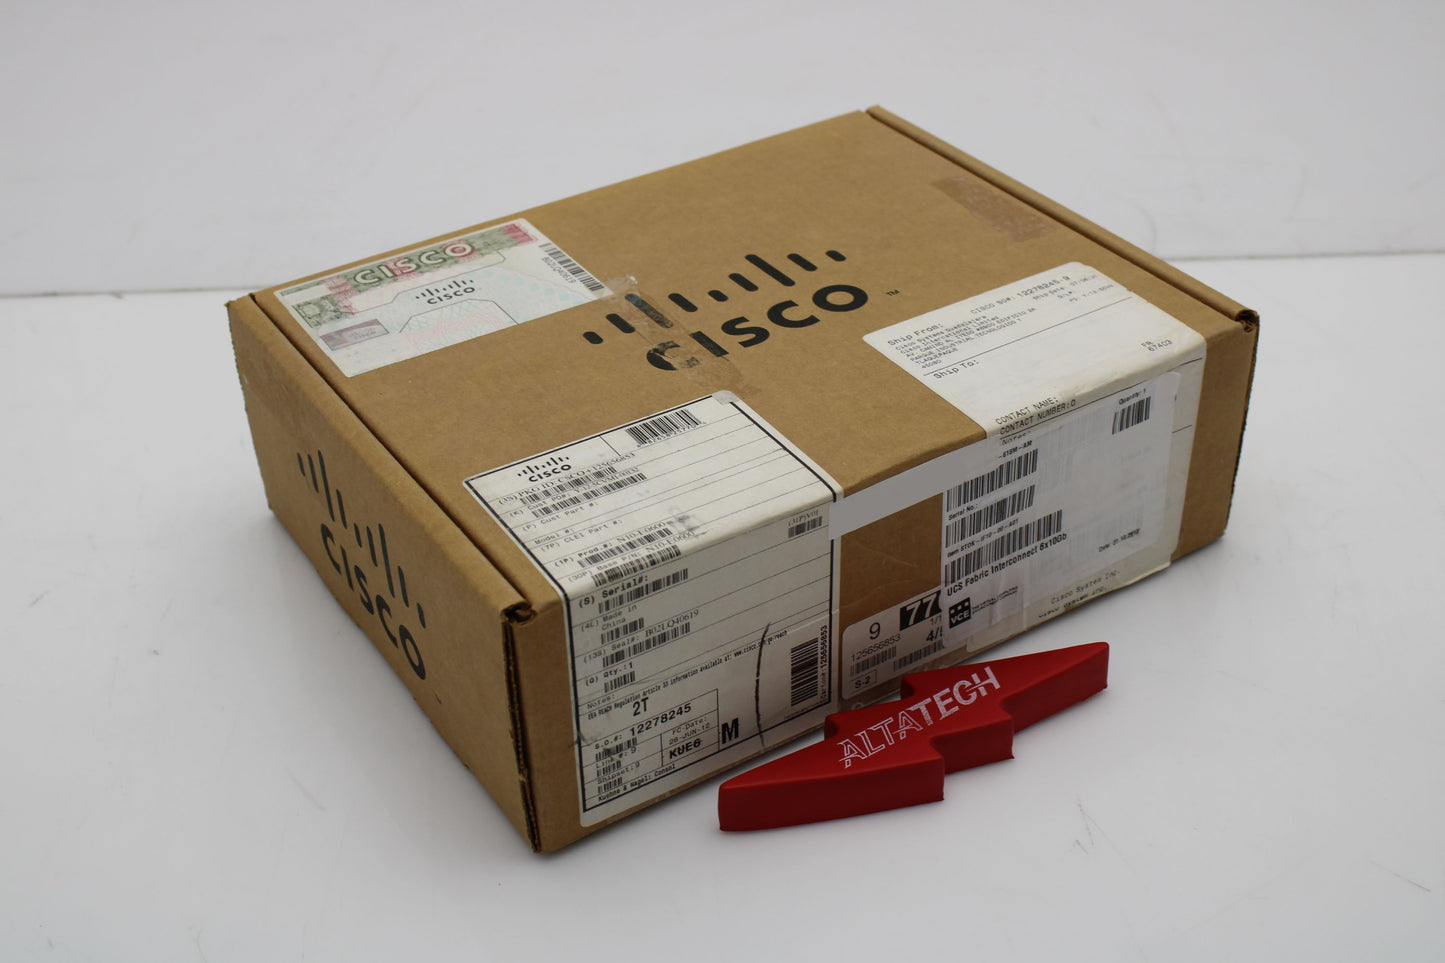 Cisco N10-E0600_NEW 6 Port 10GBE Expansion Module, New Sealed